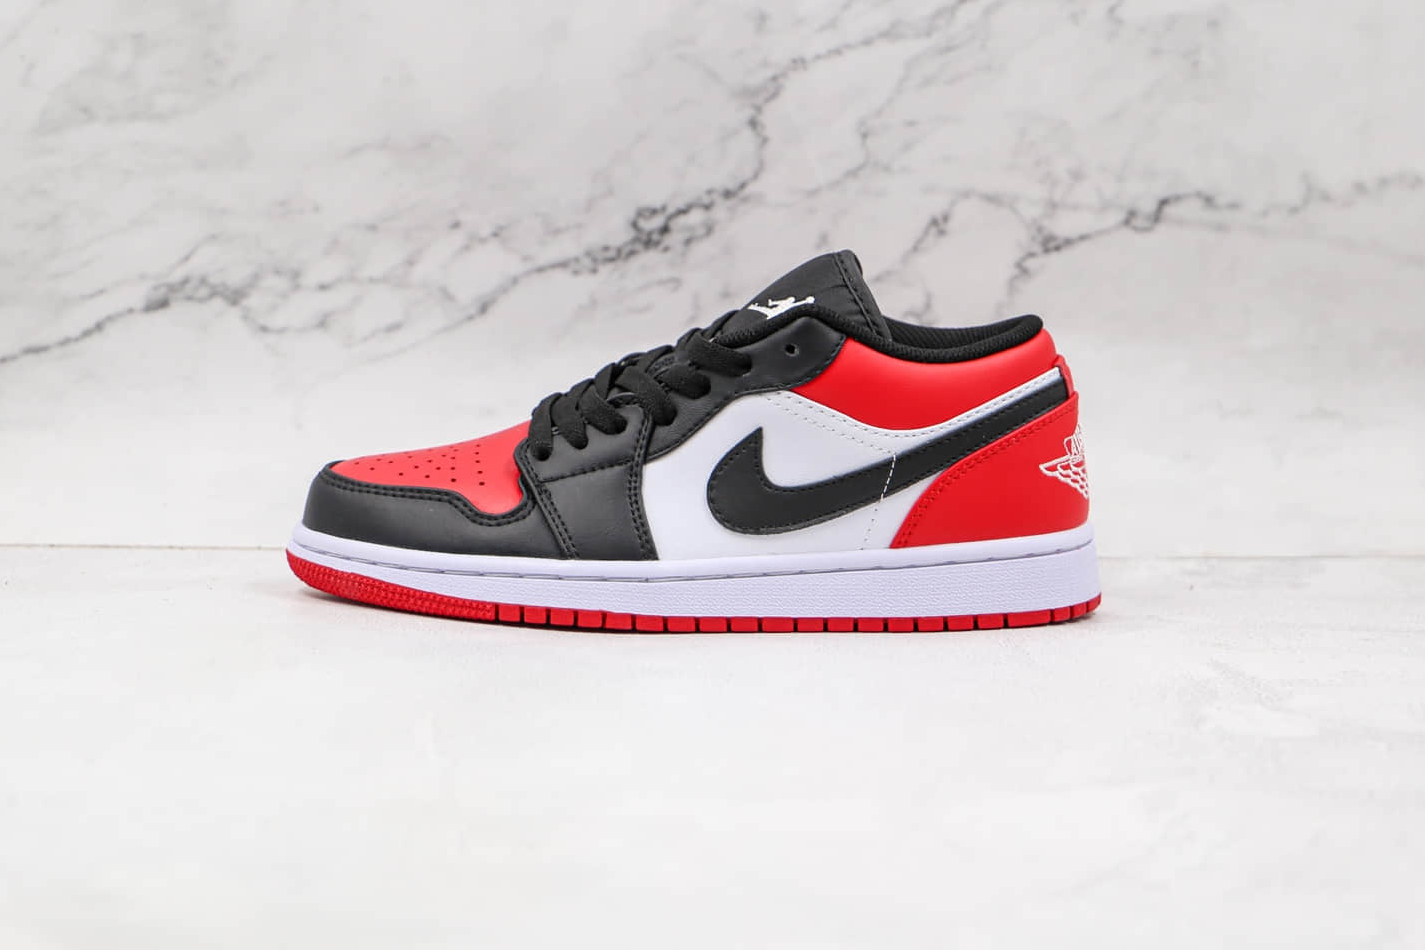 Air Jordan 1 Low 'Bred Toe' 553558-612 - Shop the Iconic Sneaker Now!